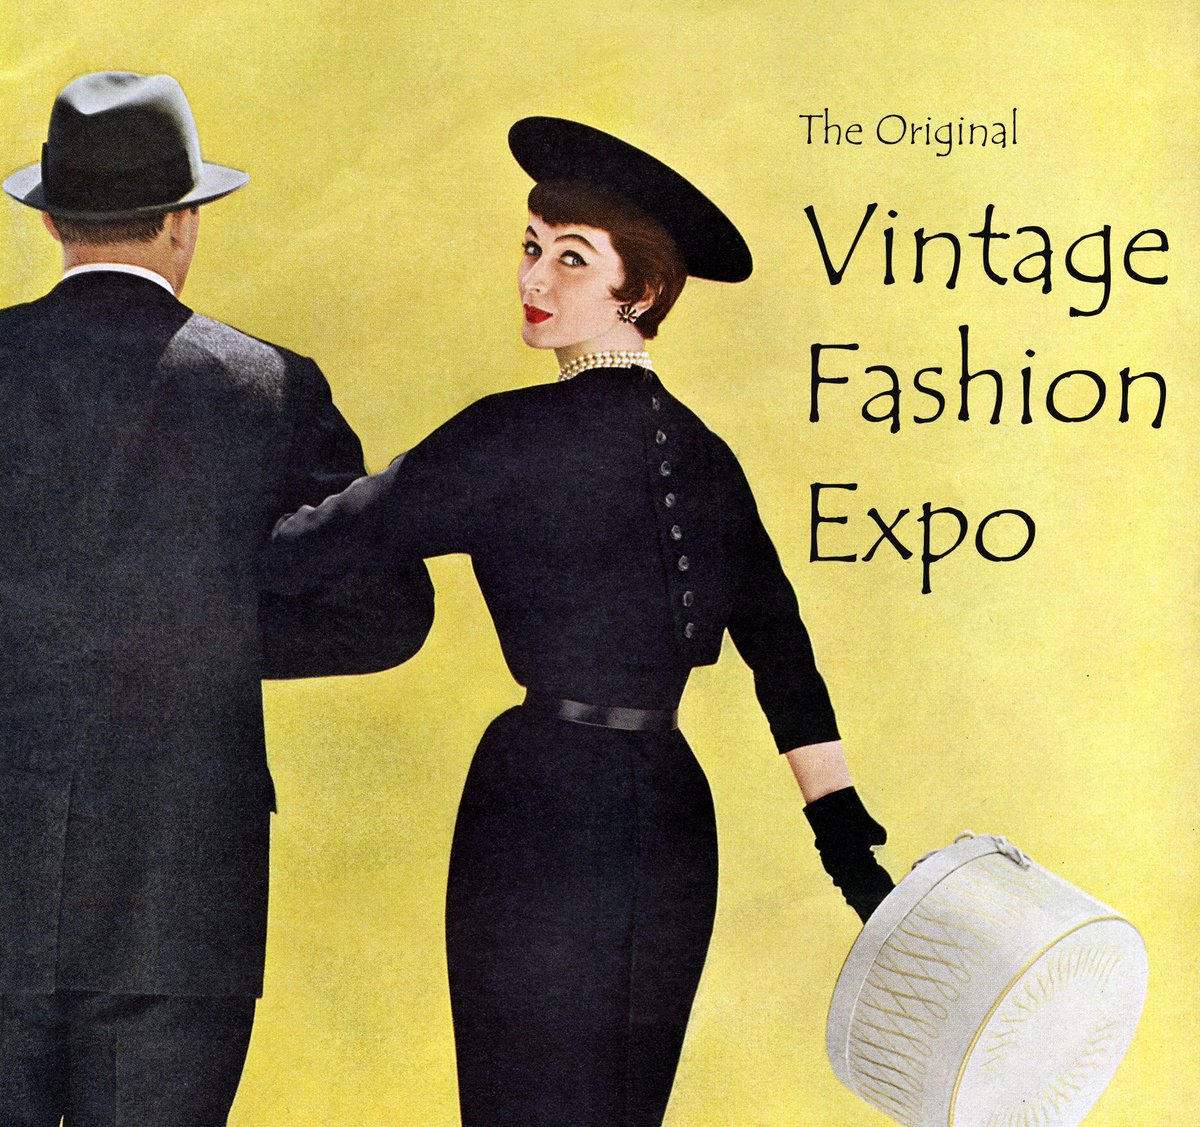 RT @vintageexpo: The next #VintageExpo is October 8th & 9th in #DTLA with special guest @DitaVonTeese tickets https://t.co/AAwkRMzh5q https…